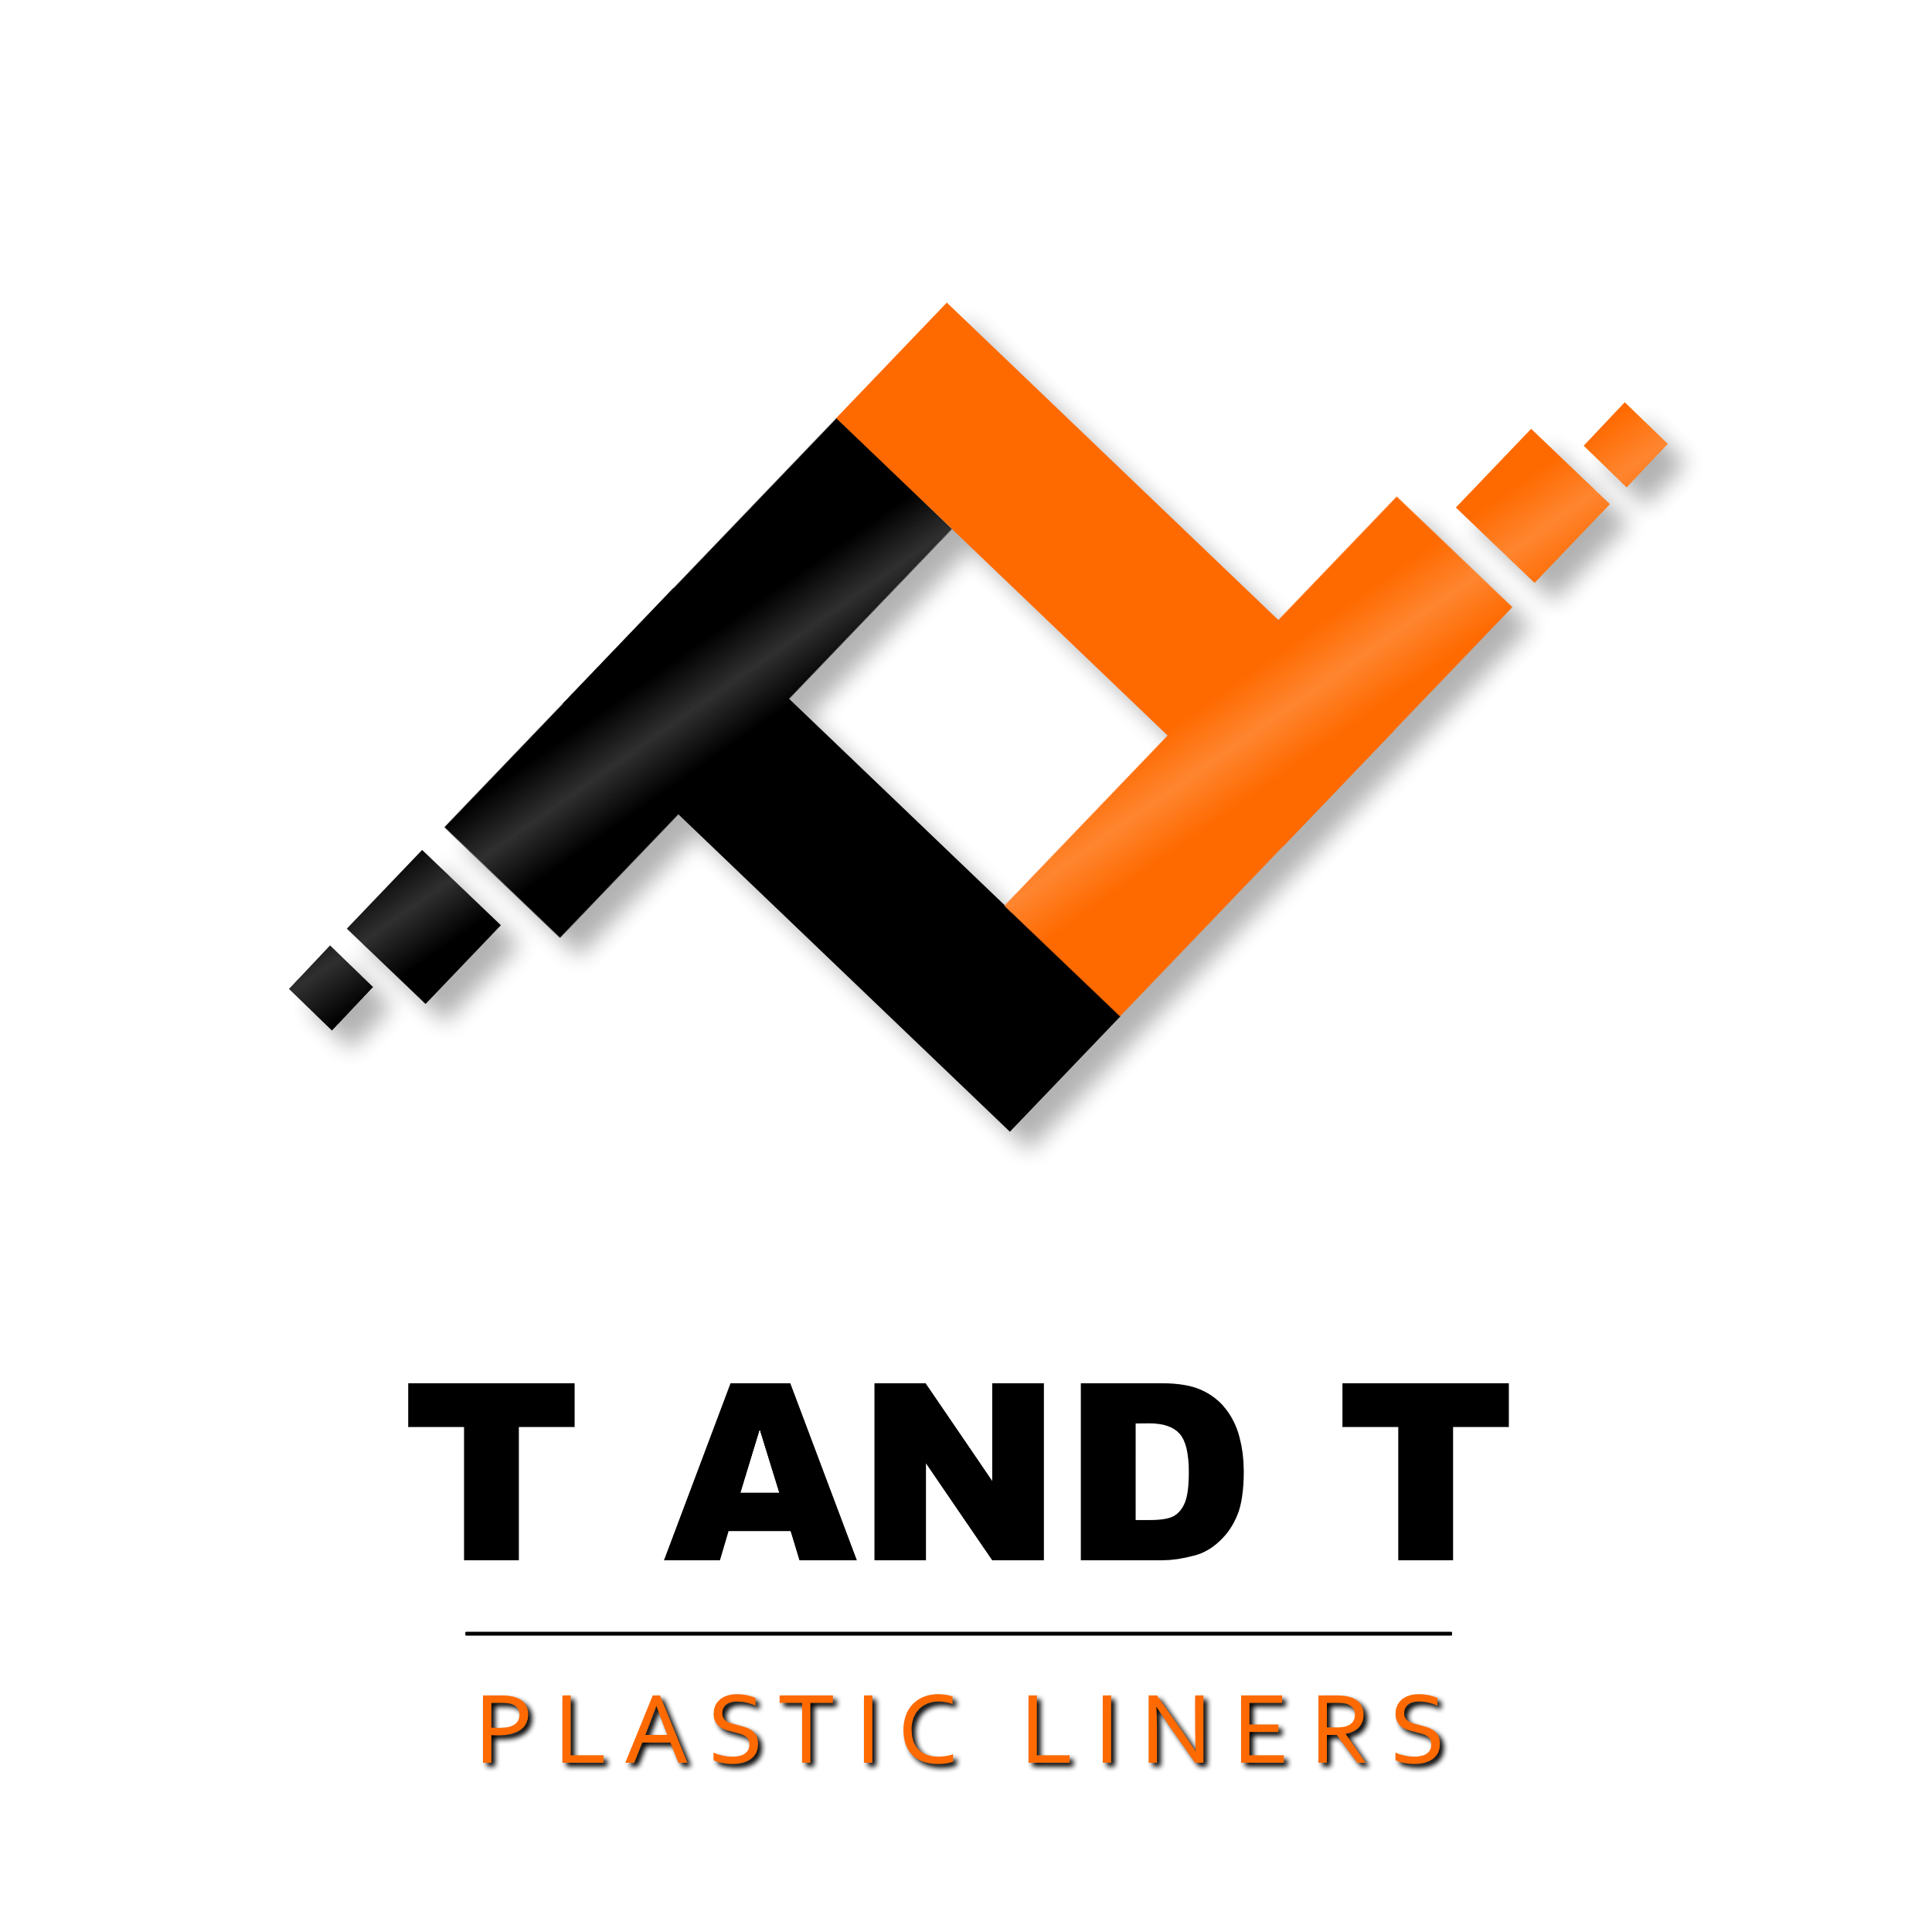 T AND T Plastic Liners Logo 2